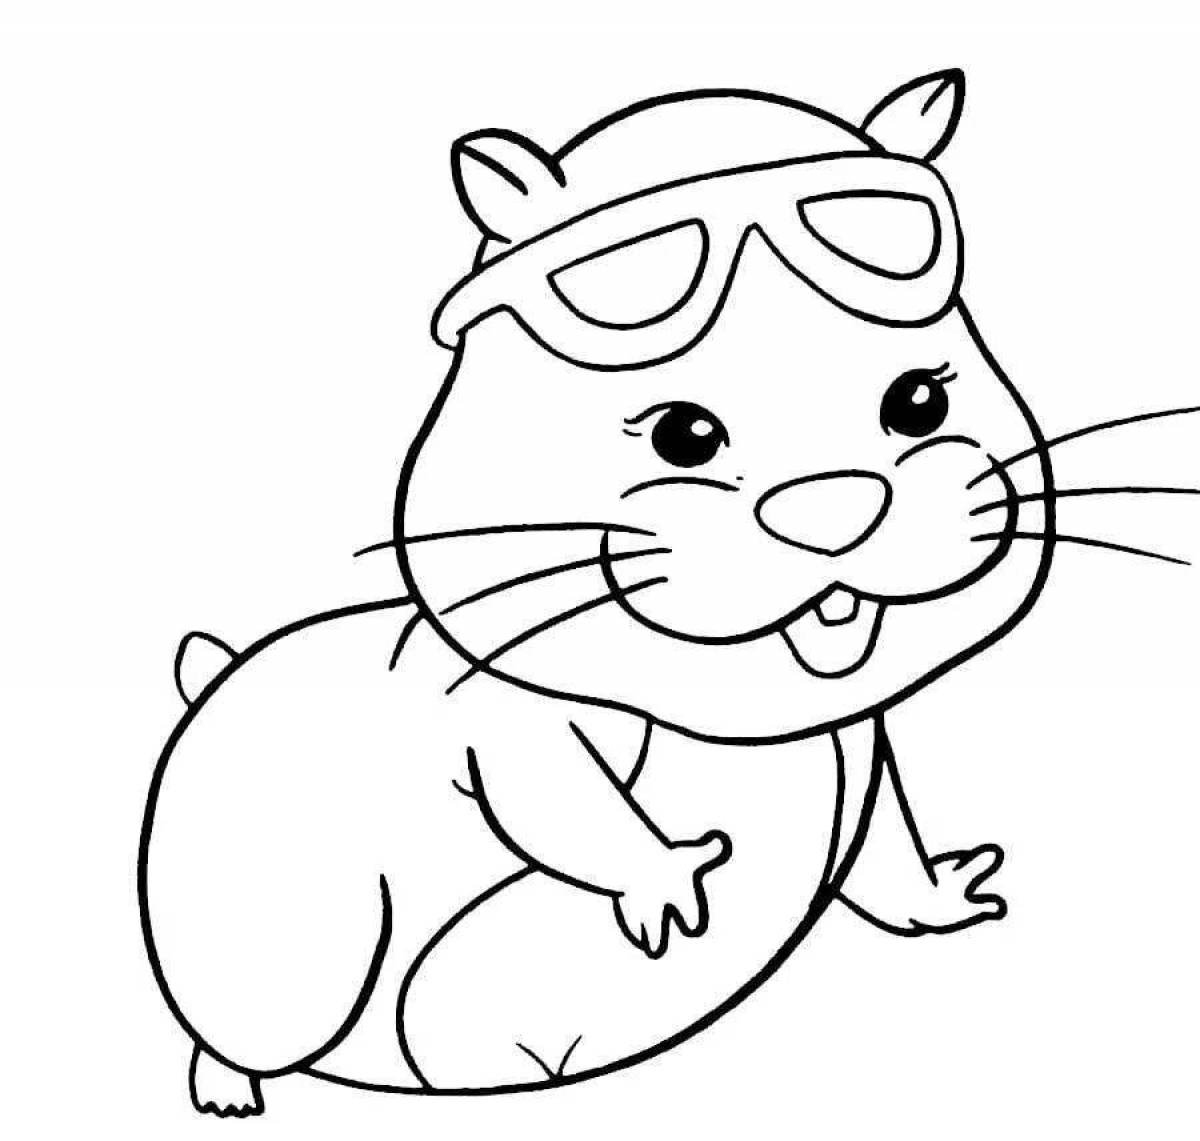 Coloring page of a sociable hamster